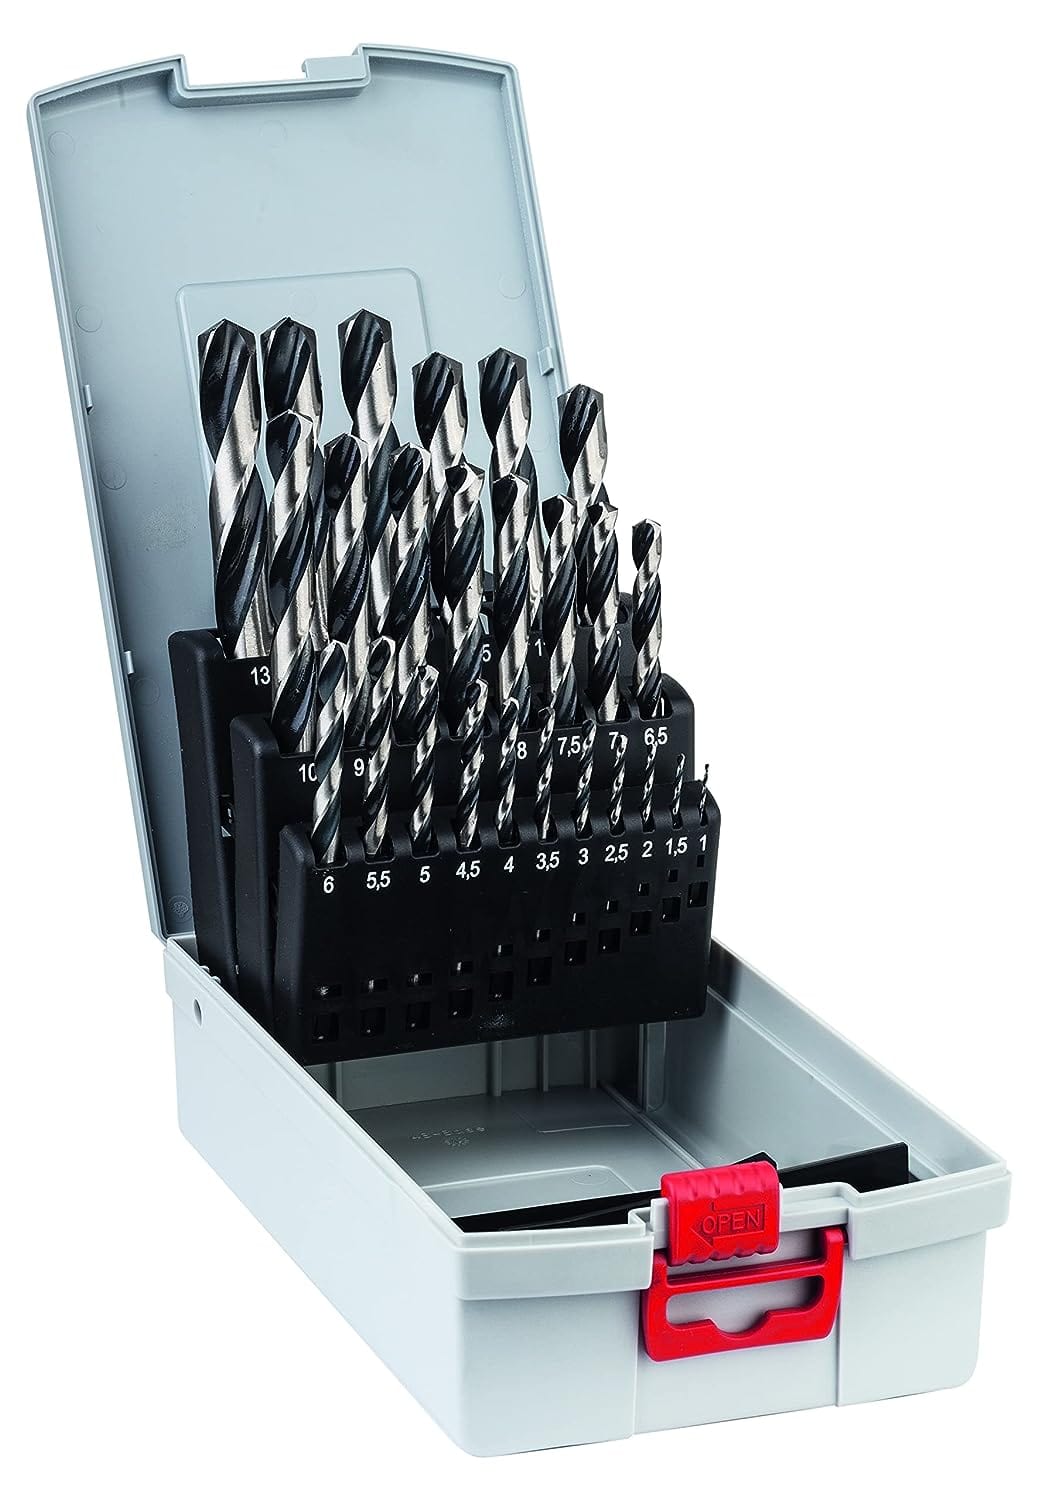 Bosch 25 Pieces Point-TEQ HSS Drill Bit Set 1-13mm - 2608587018 | Supply Master, Accra, Ghana Drill Bits Buy Tools hardware Building materials